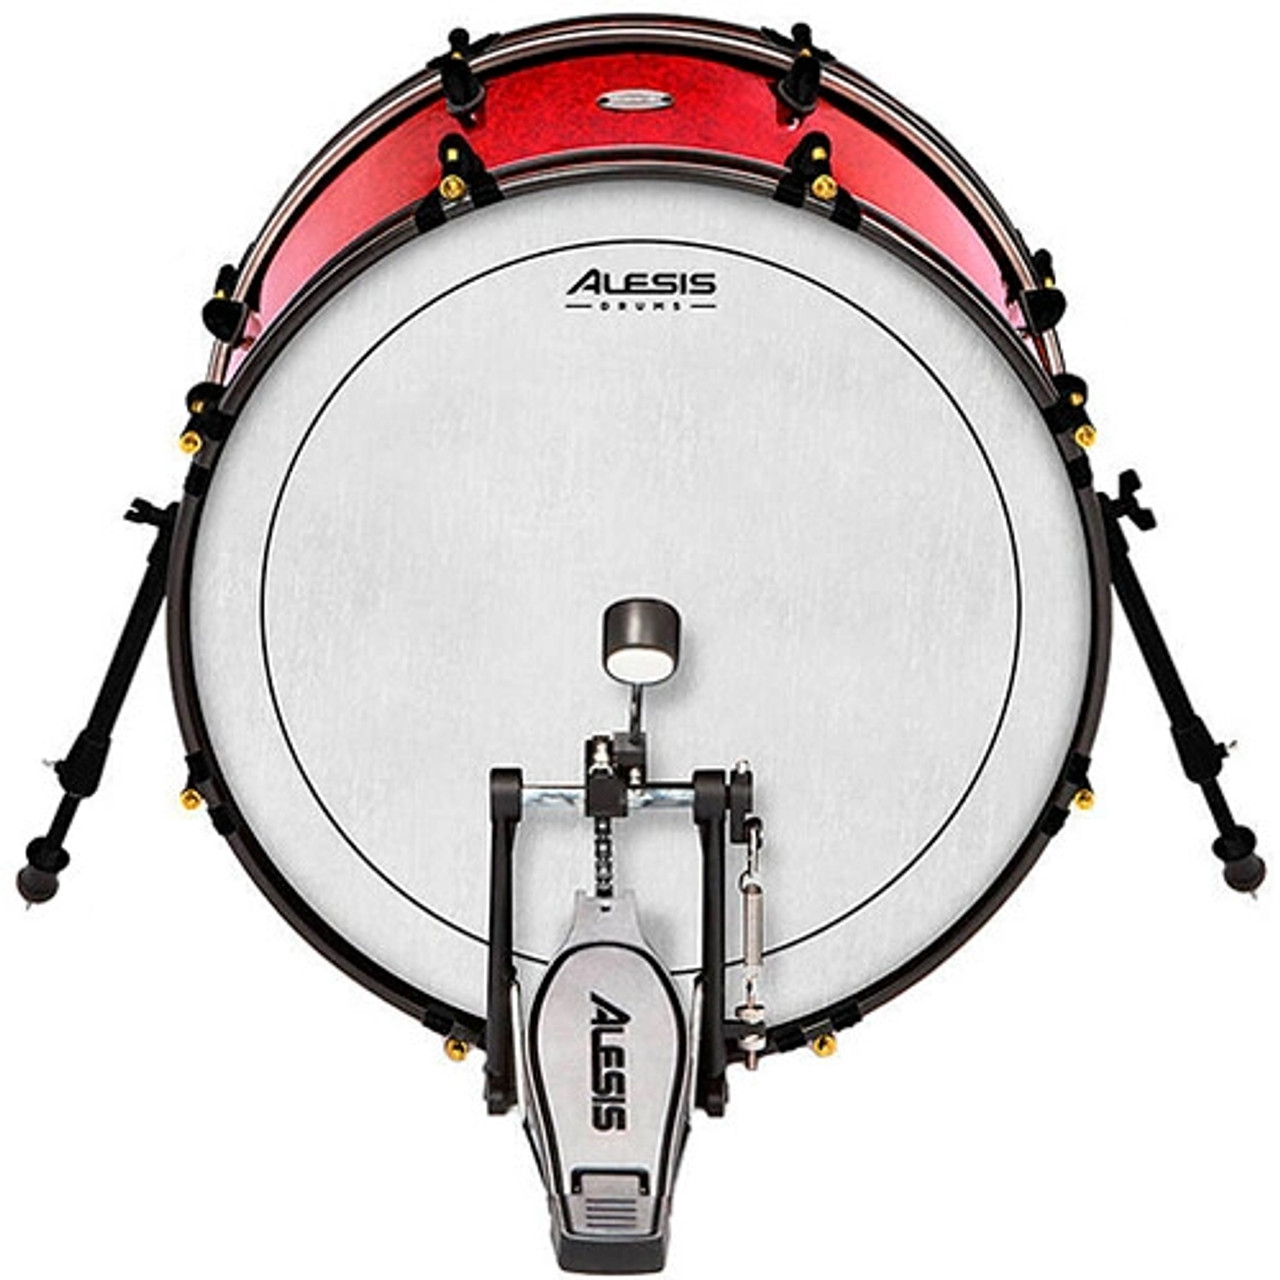 Alesis Strike Pro Special Edition Professional Electronic Drum Kit